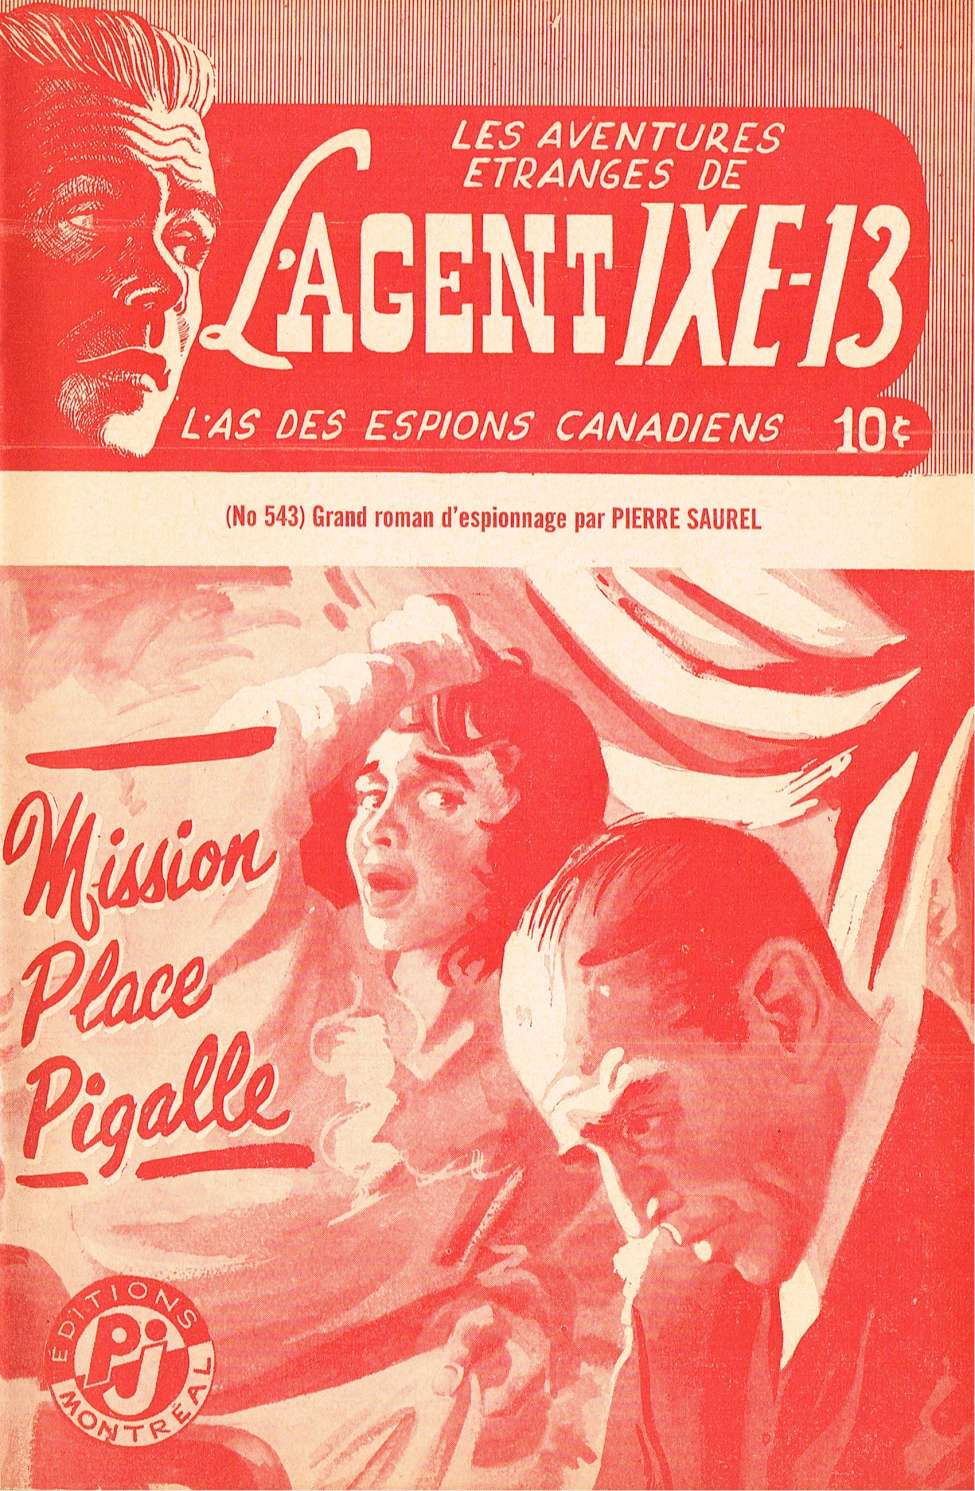 Book Cover For L'Agent IXE-13 v2 543 - Mission place Pigalle